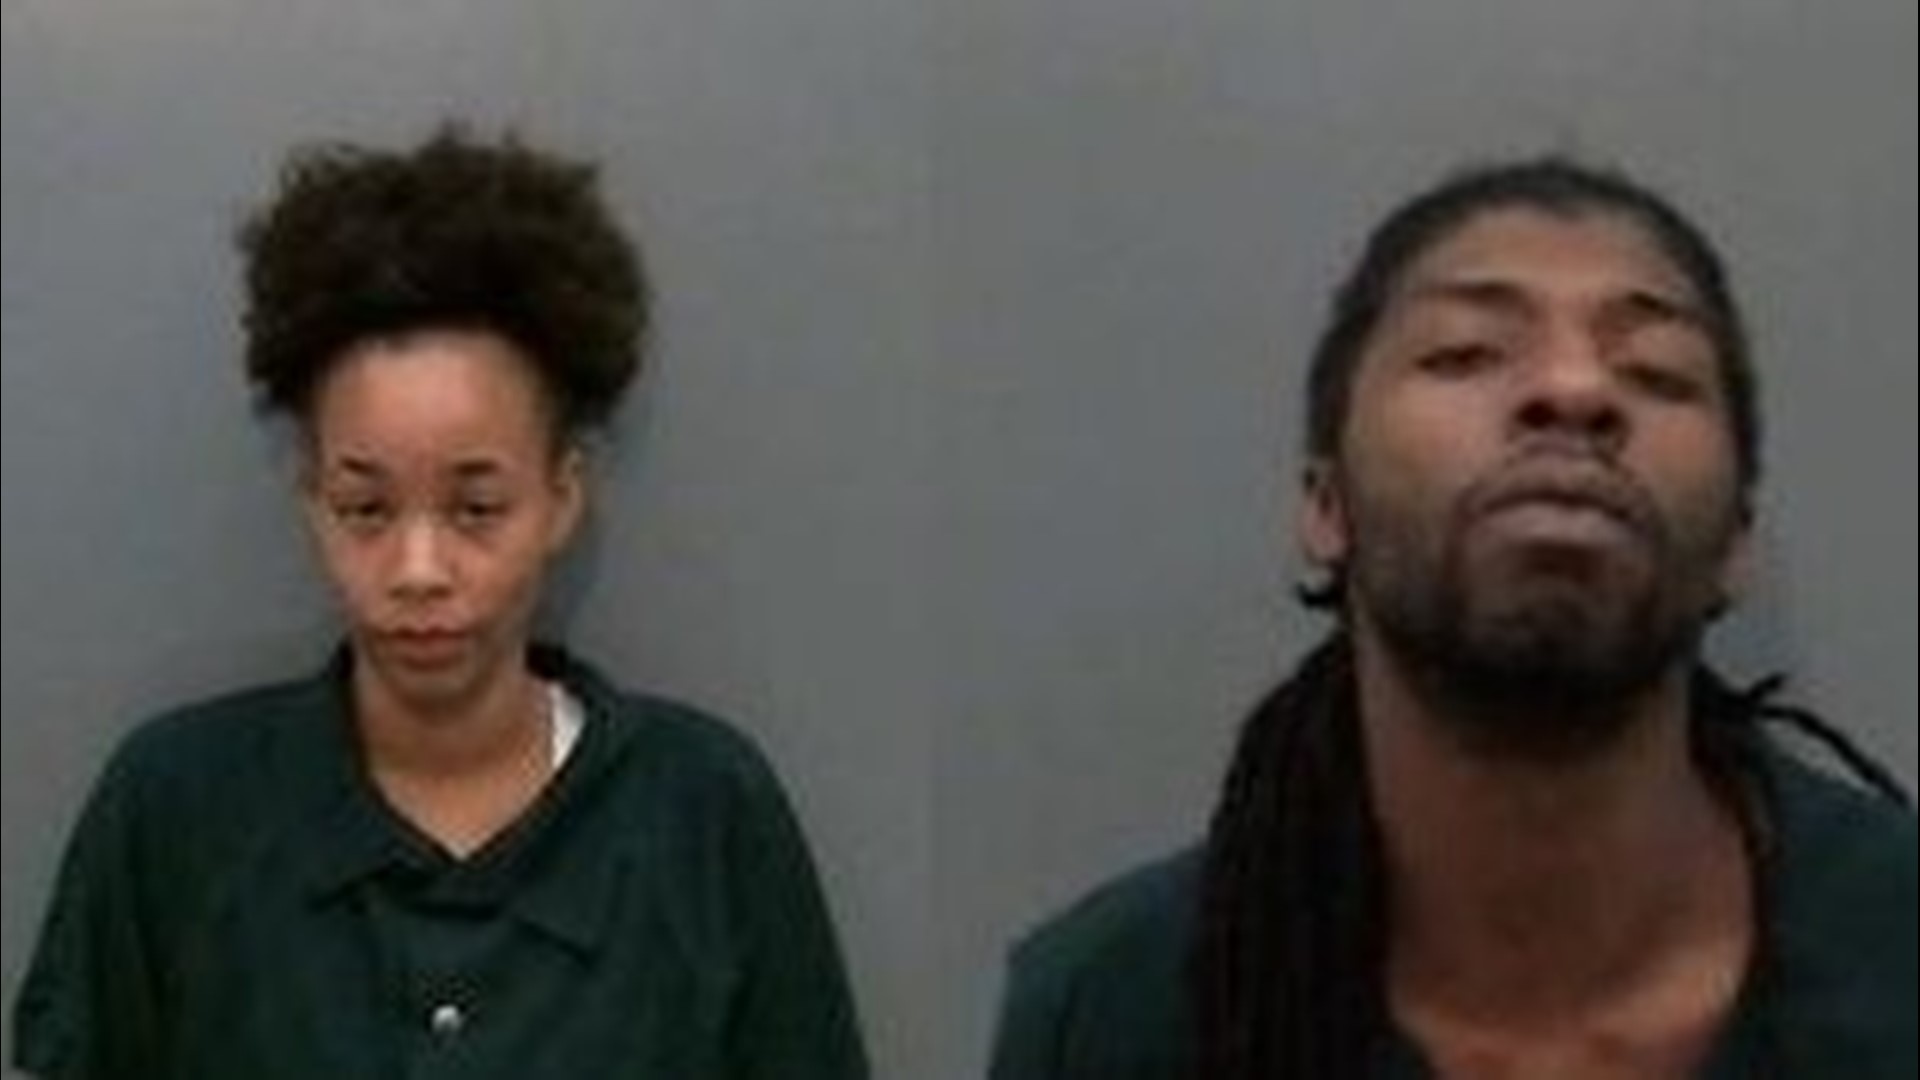 Pine Bluff police arrest couple in connection with Saturday night homicide